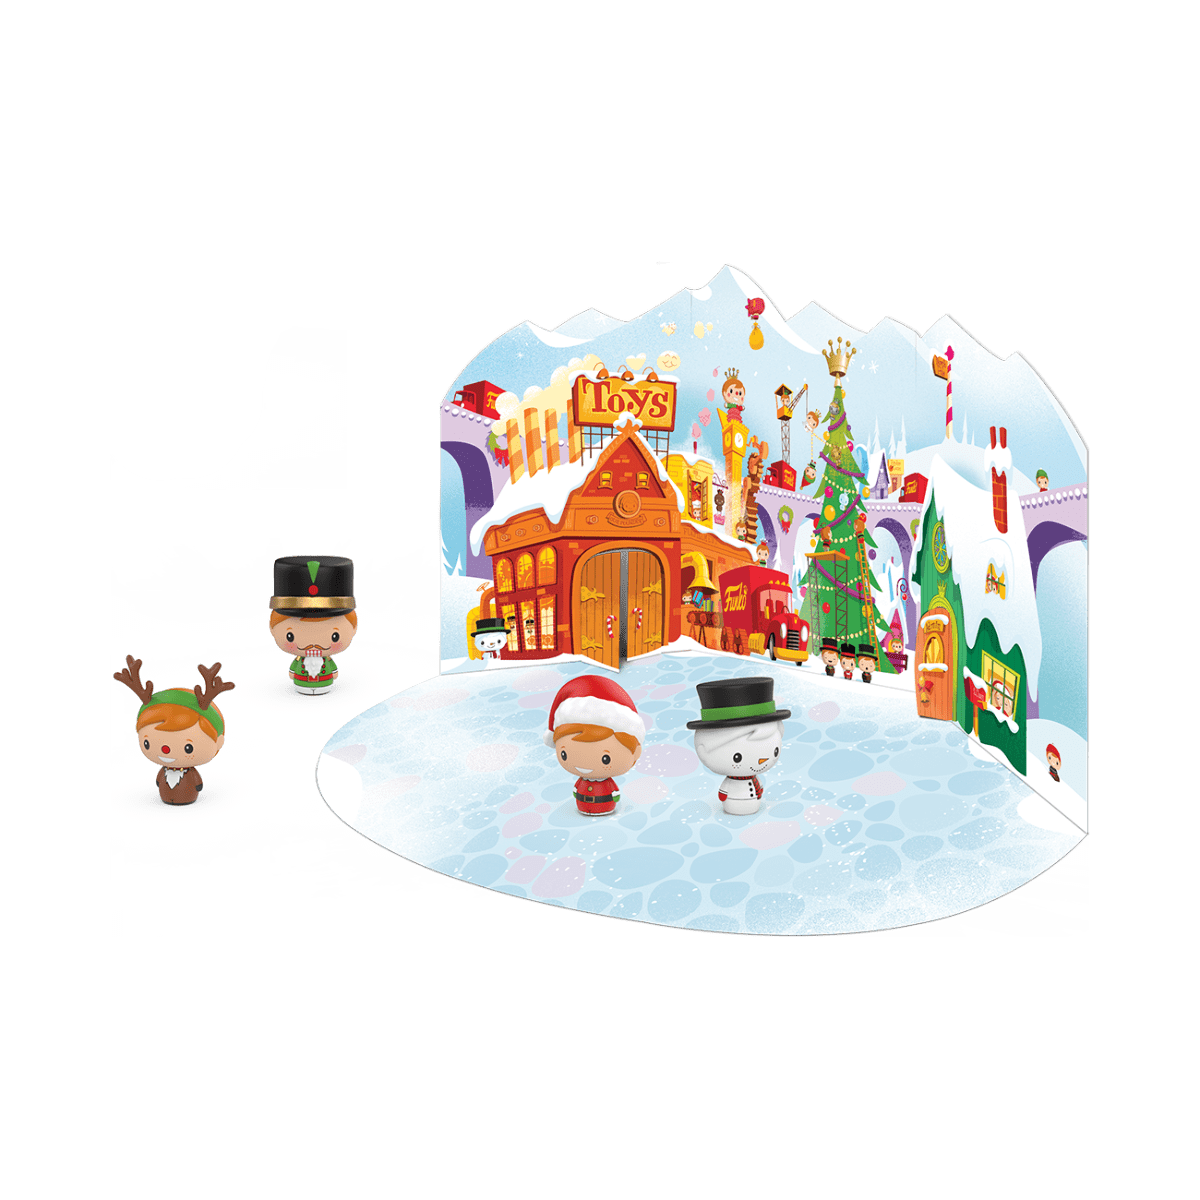 Freddy Funko 24Piece Pint Size Heroes Advent Calendar Available Now